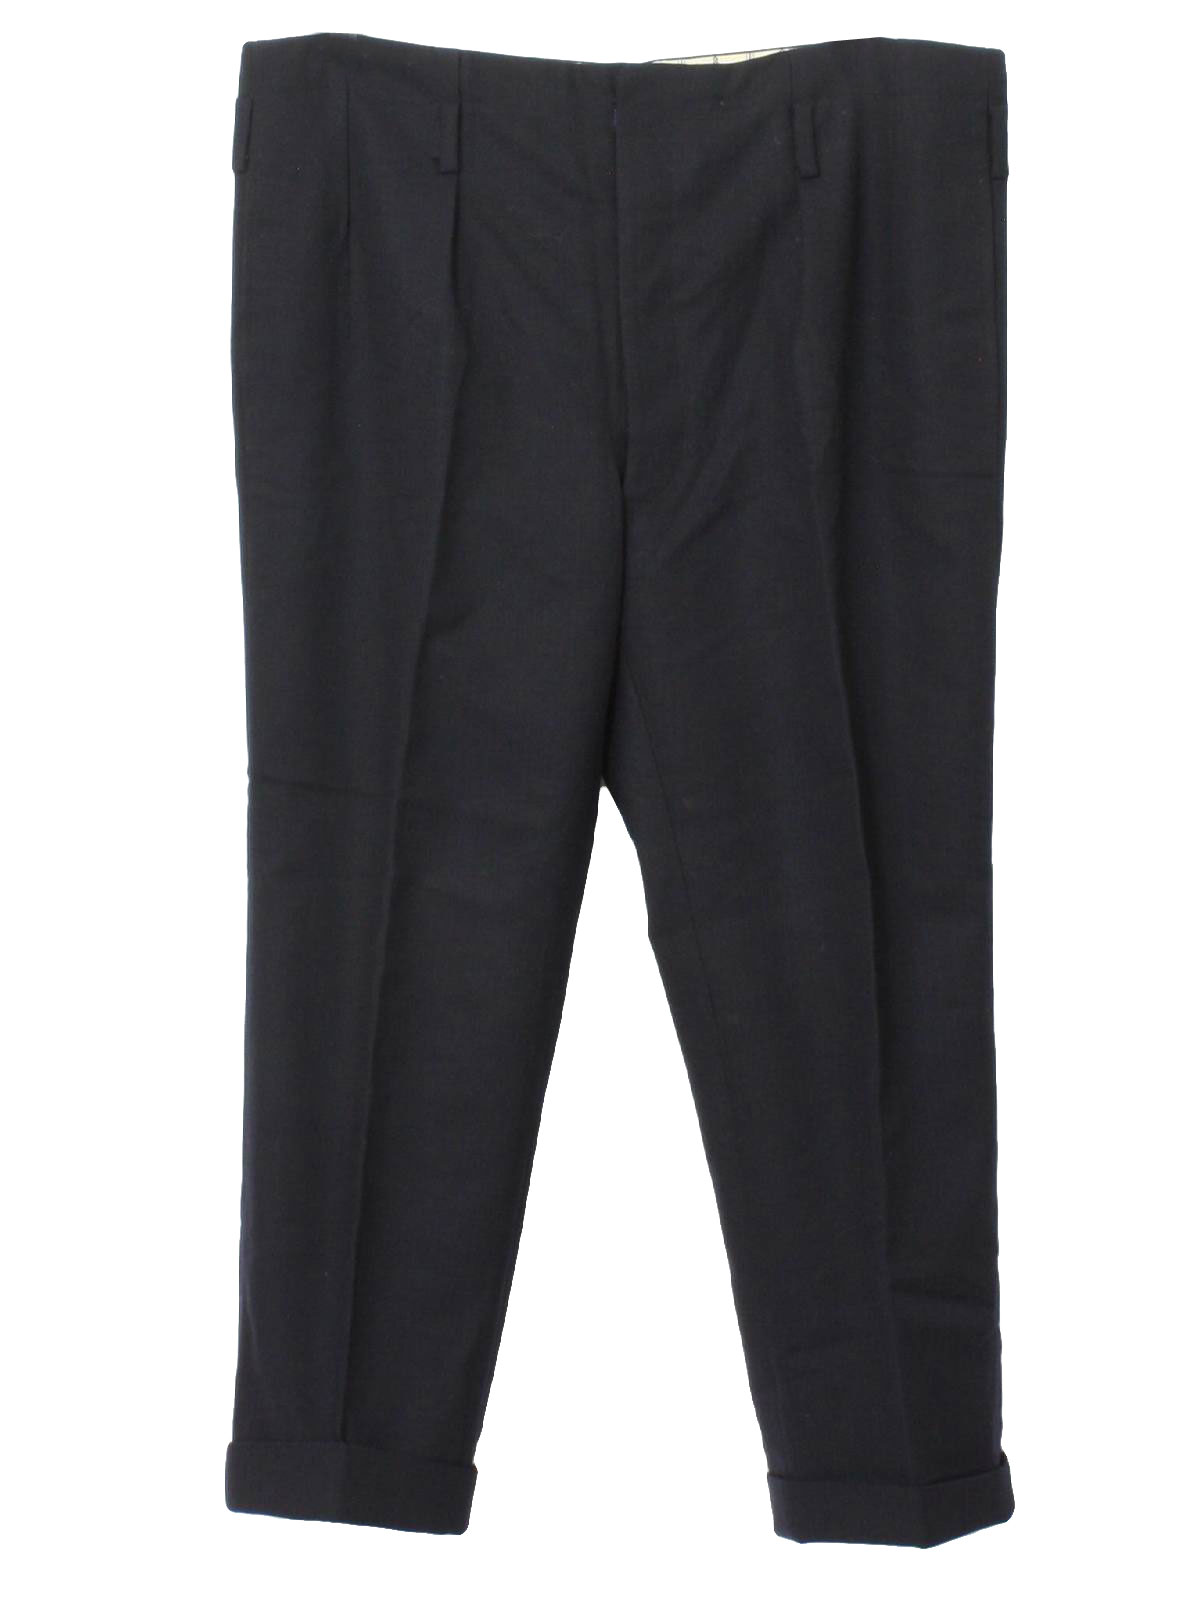 1930's Pants (Missing Label): 30s -Missing Label- Mens midnight blue ...